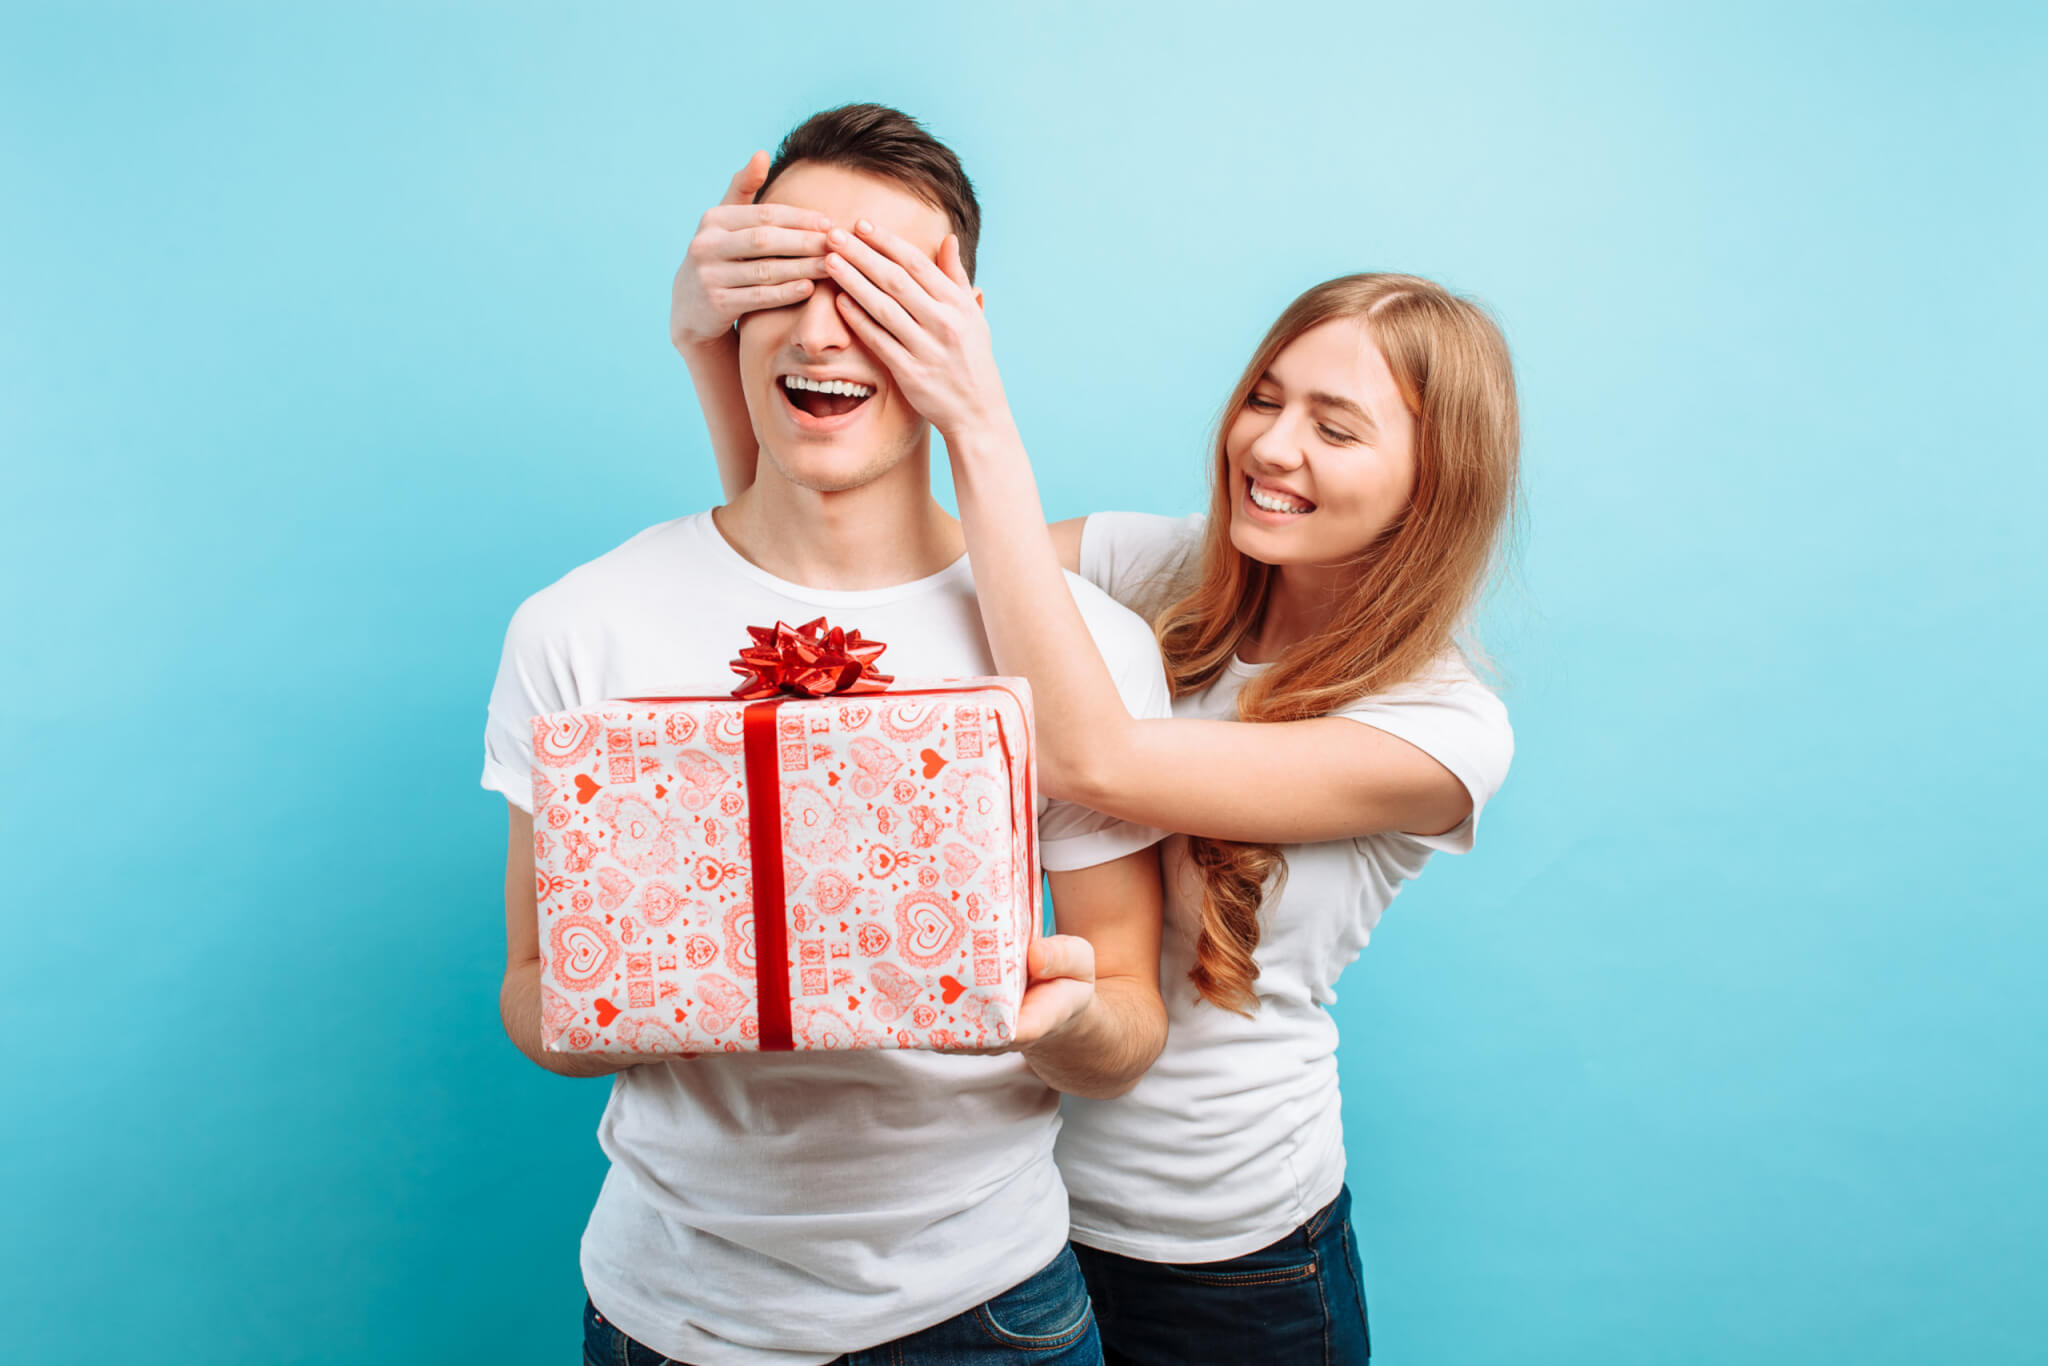 Woman surprises her boyfriend or husband with a gift on Valentine's Day